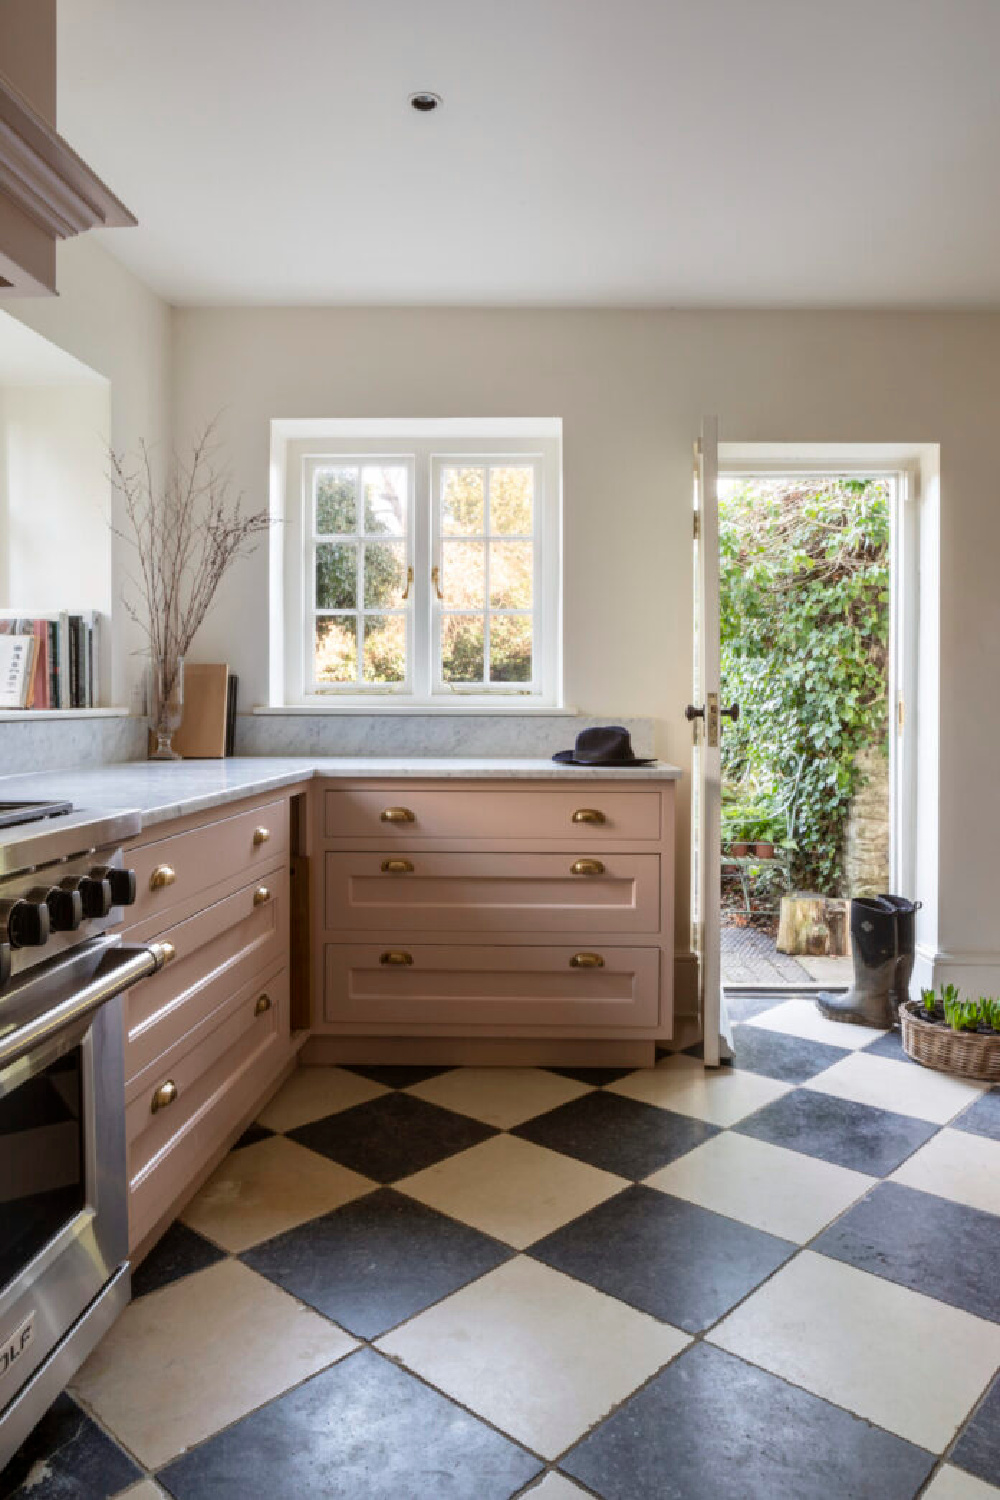 Pink kitchen cabinets and checkered floor. Samantha Todhunter - Oxfordshire 1707 home. #englishcountryhome #historichomes